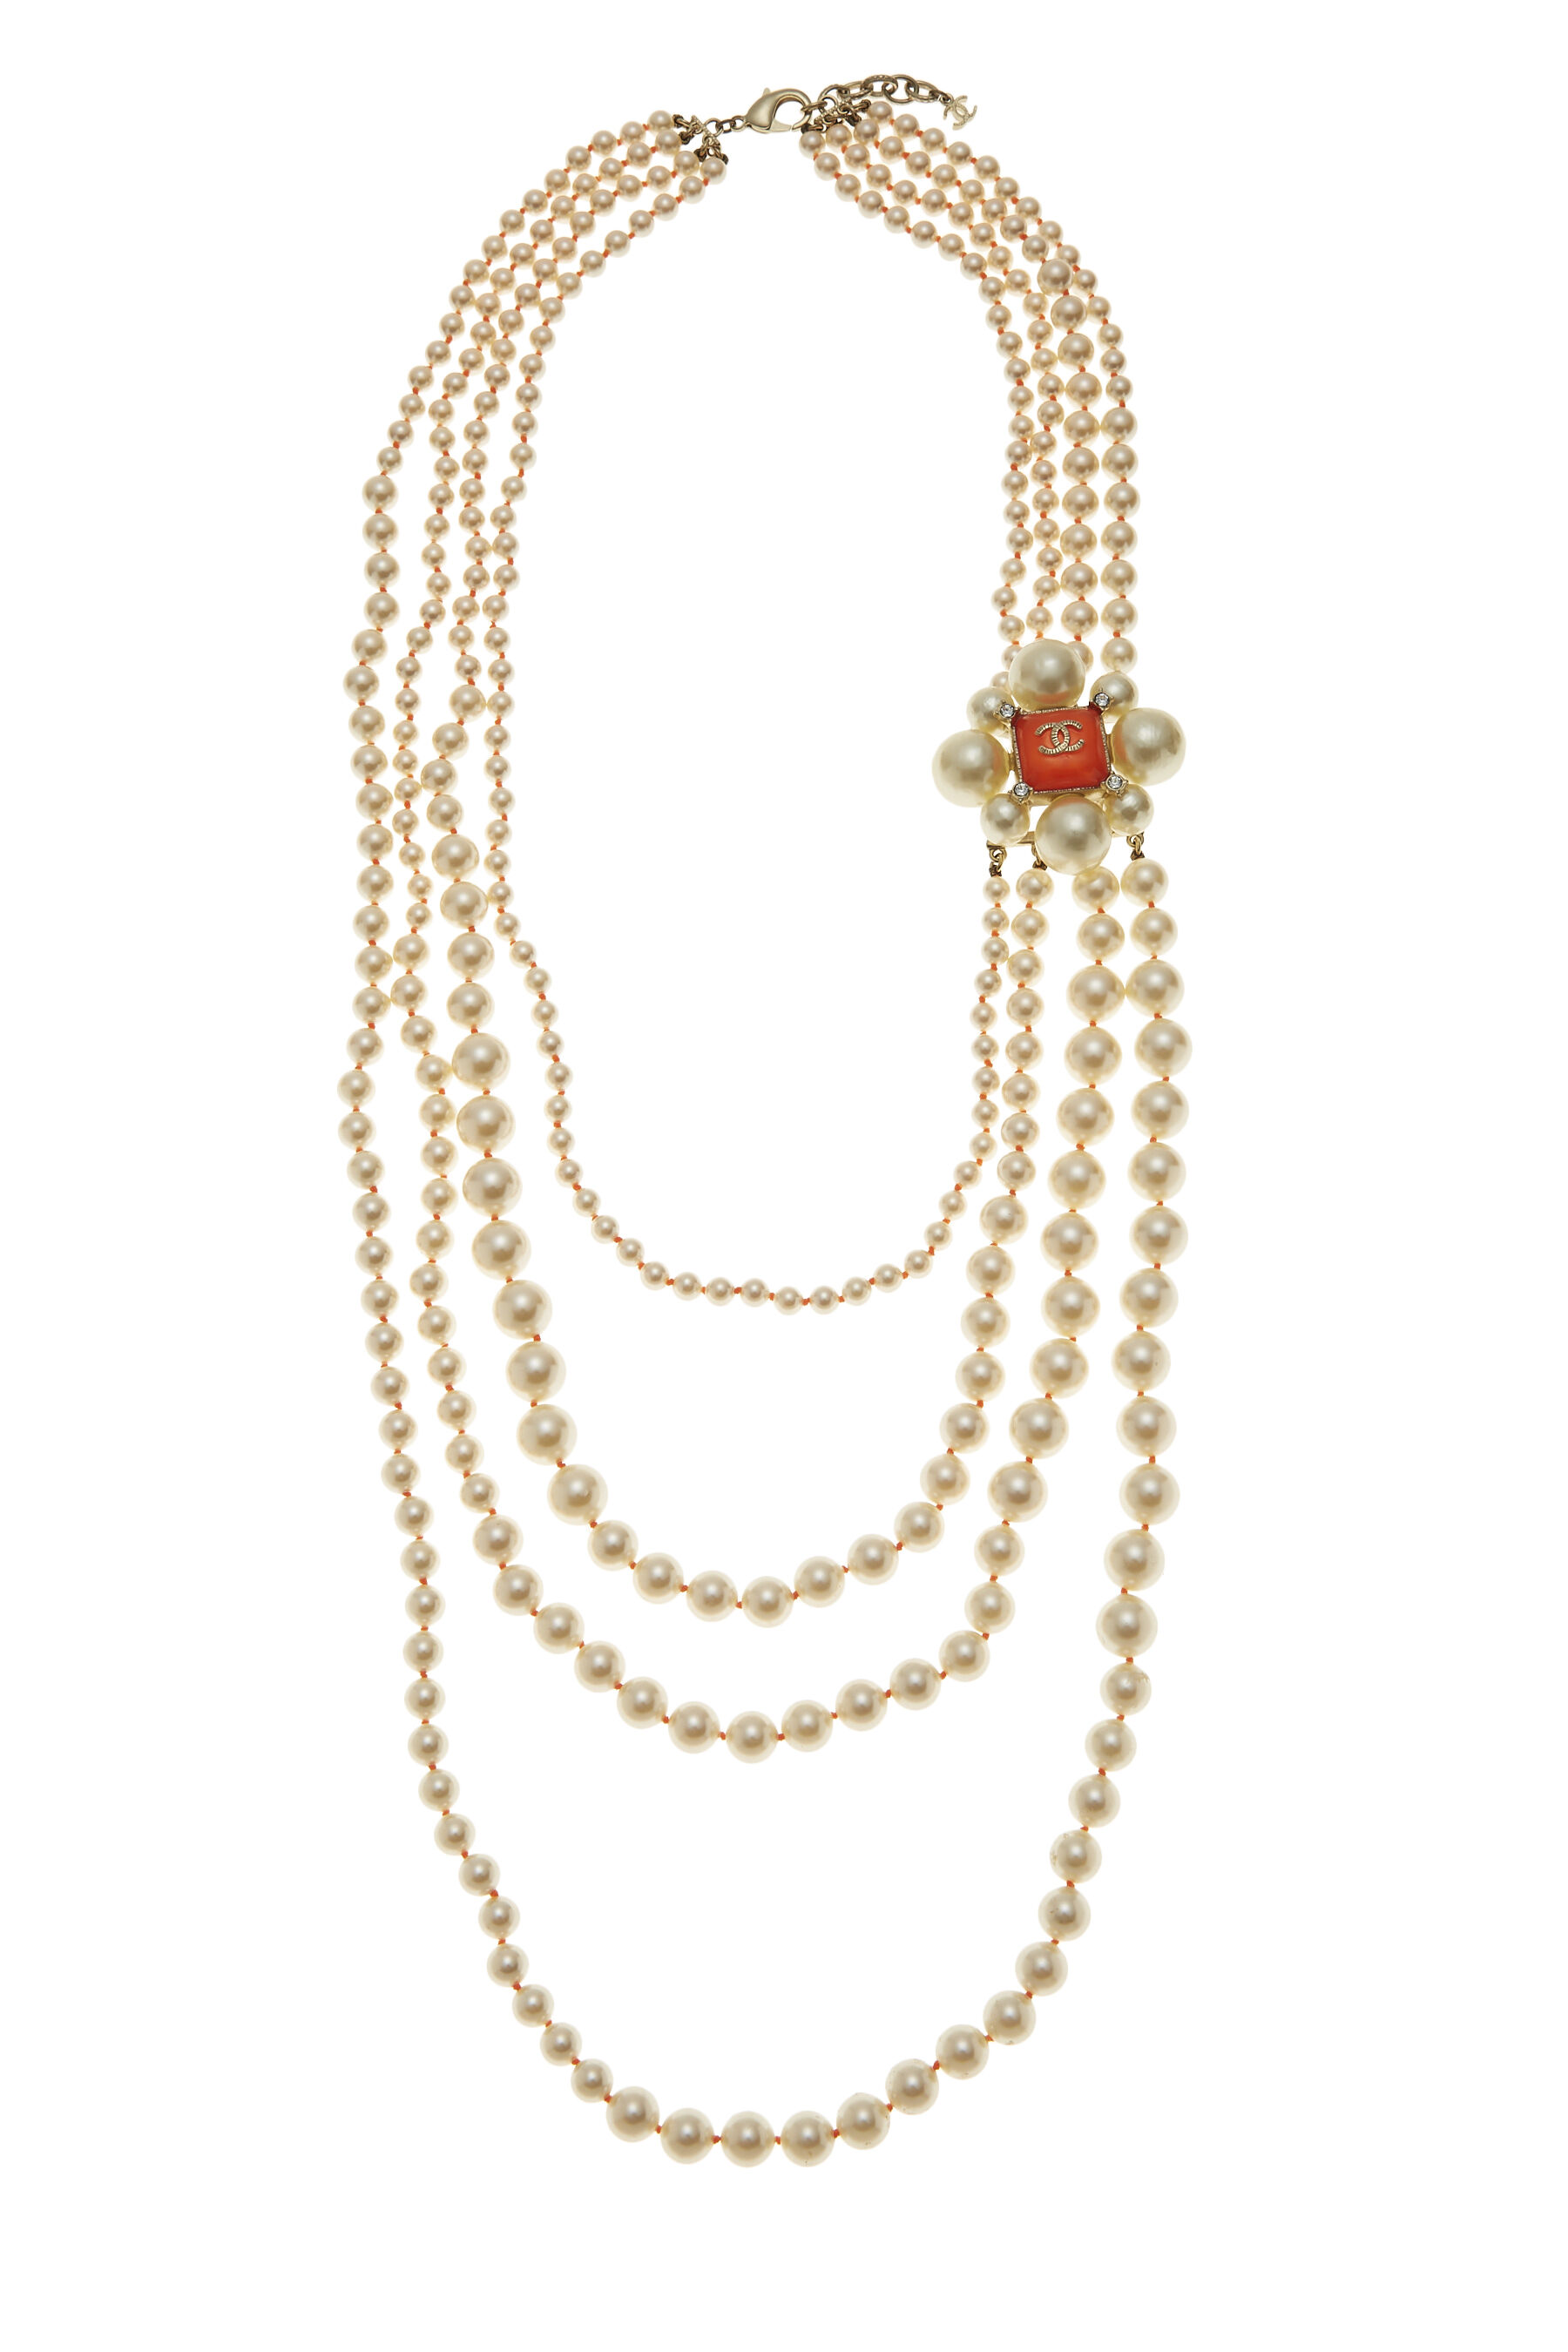 Chanel Faux Pearl & Orange Gripoix Layered Long Necklace